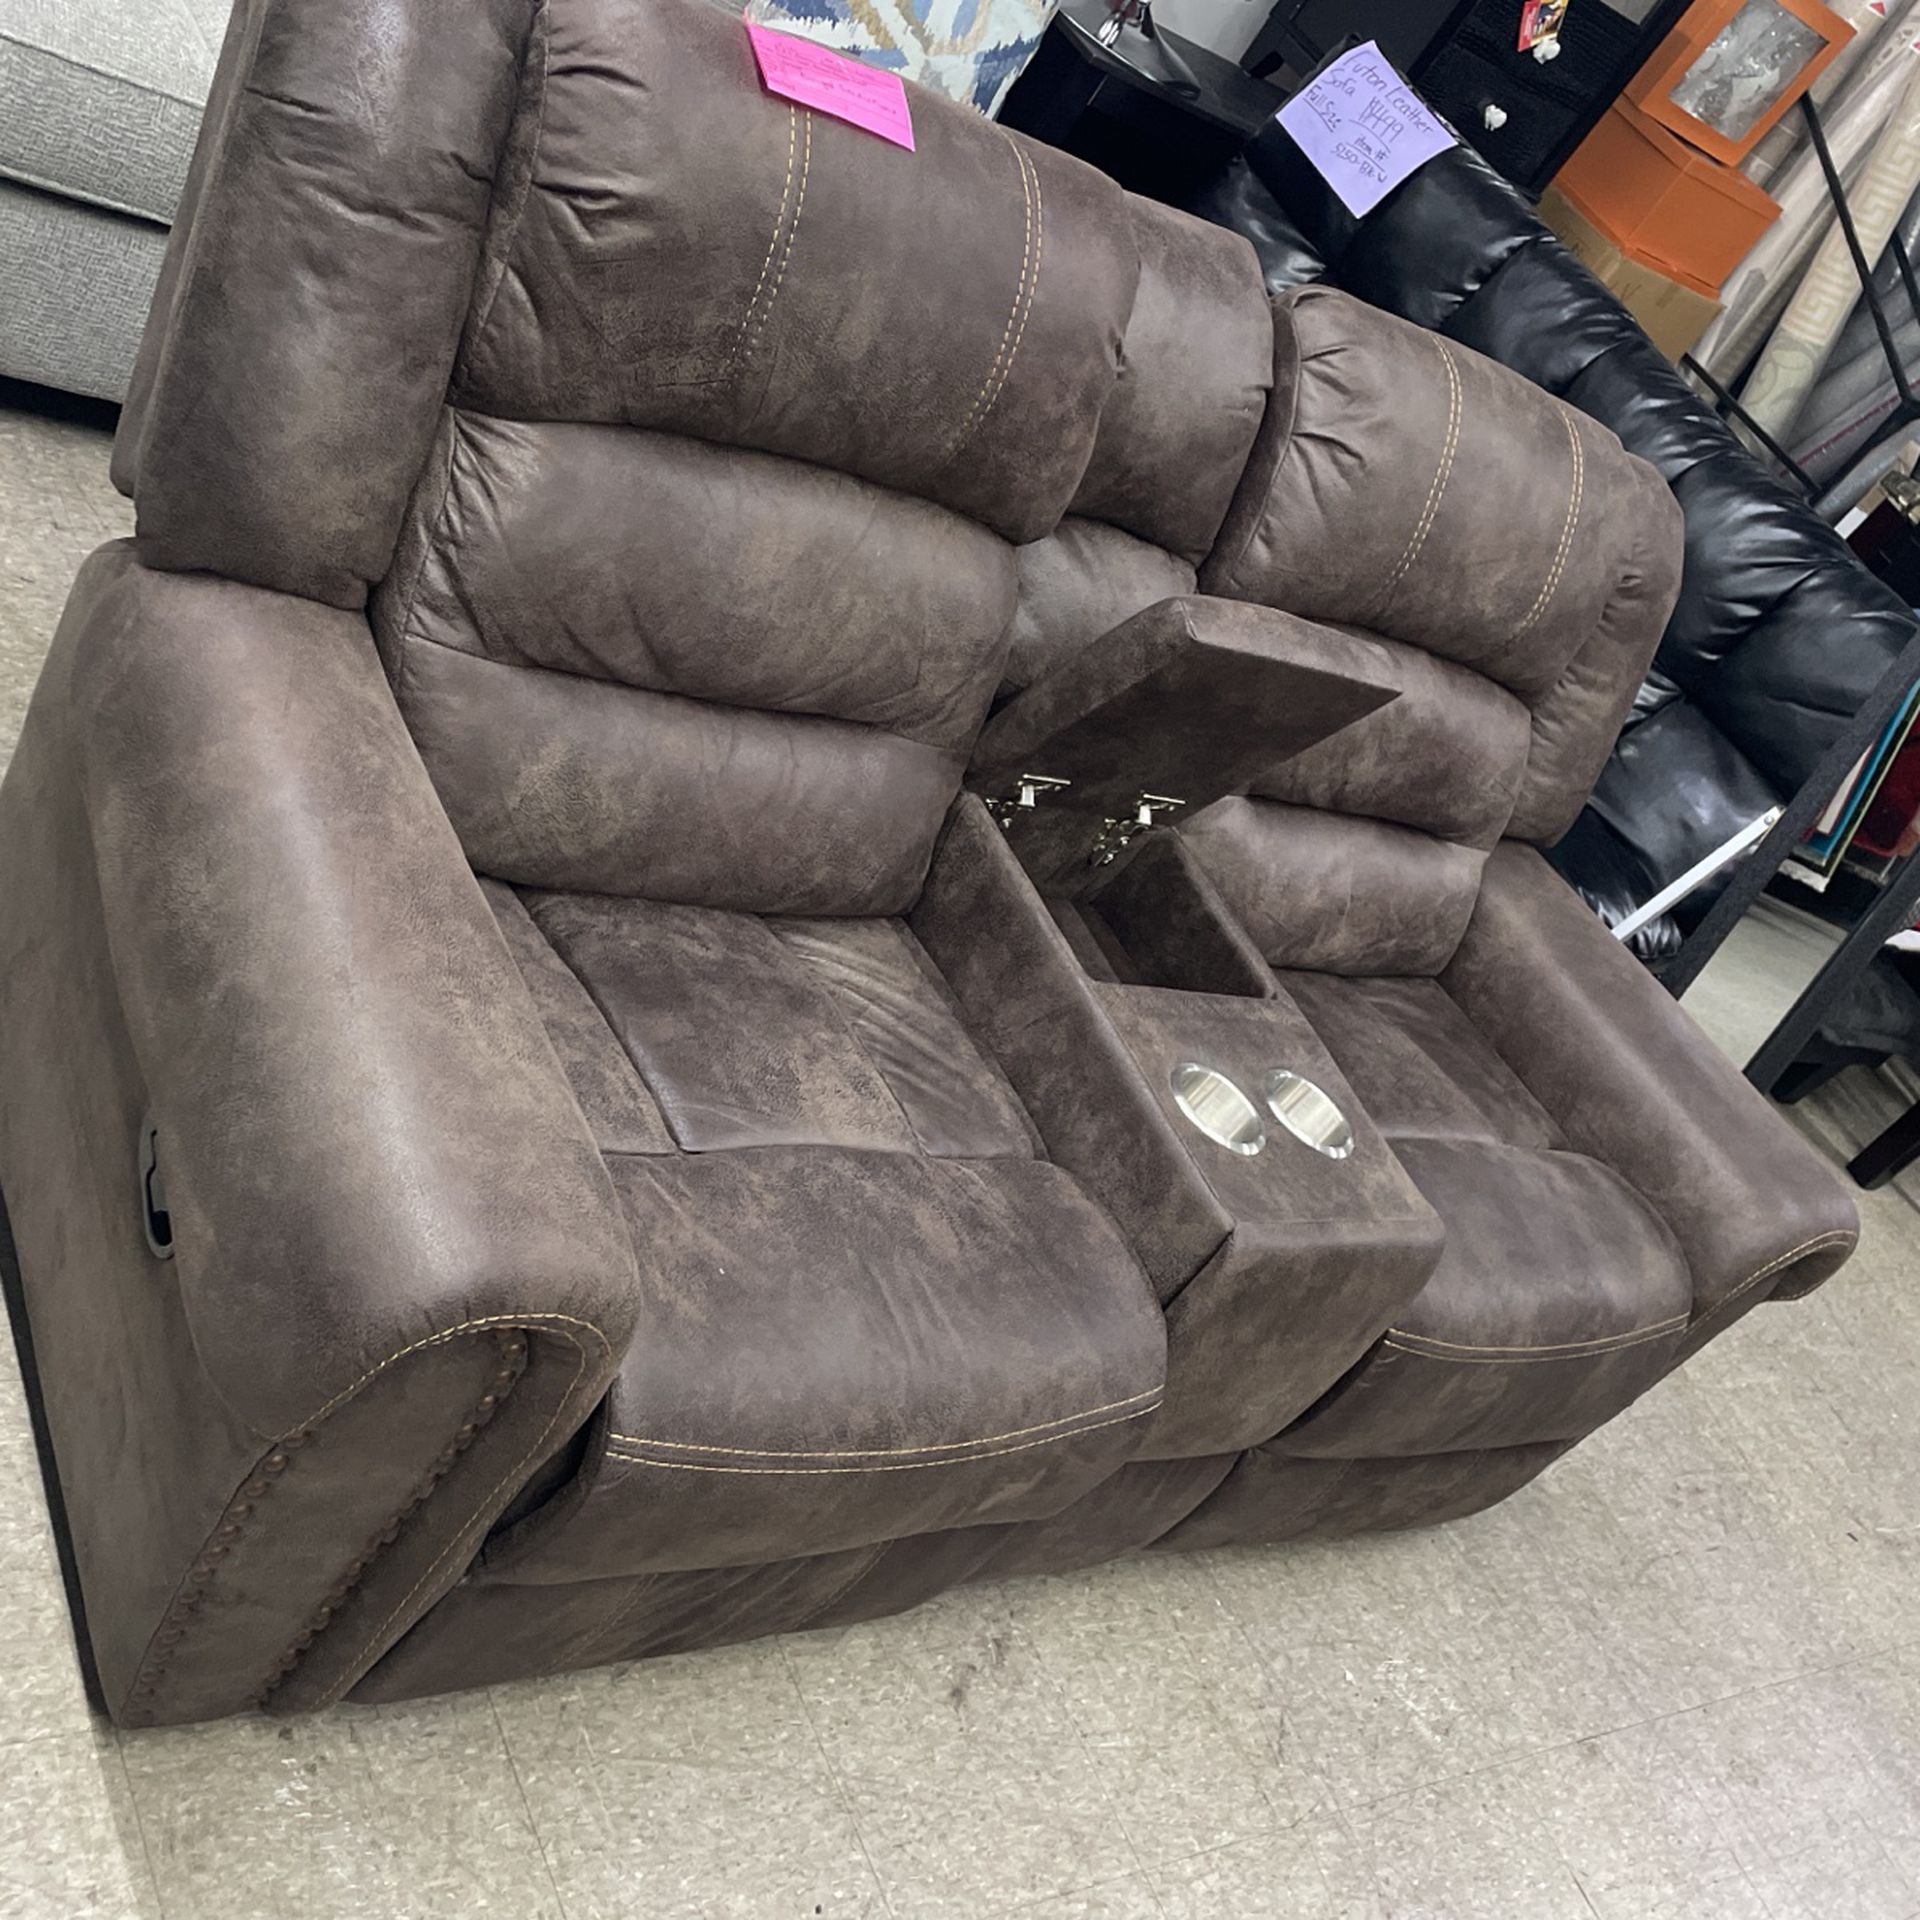 One Side Recliner AS-IS scratched/dent $49 Initial Payment